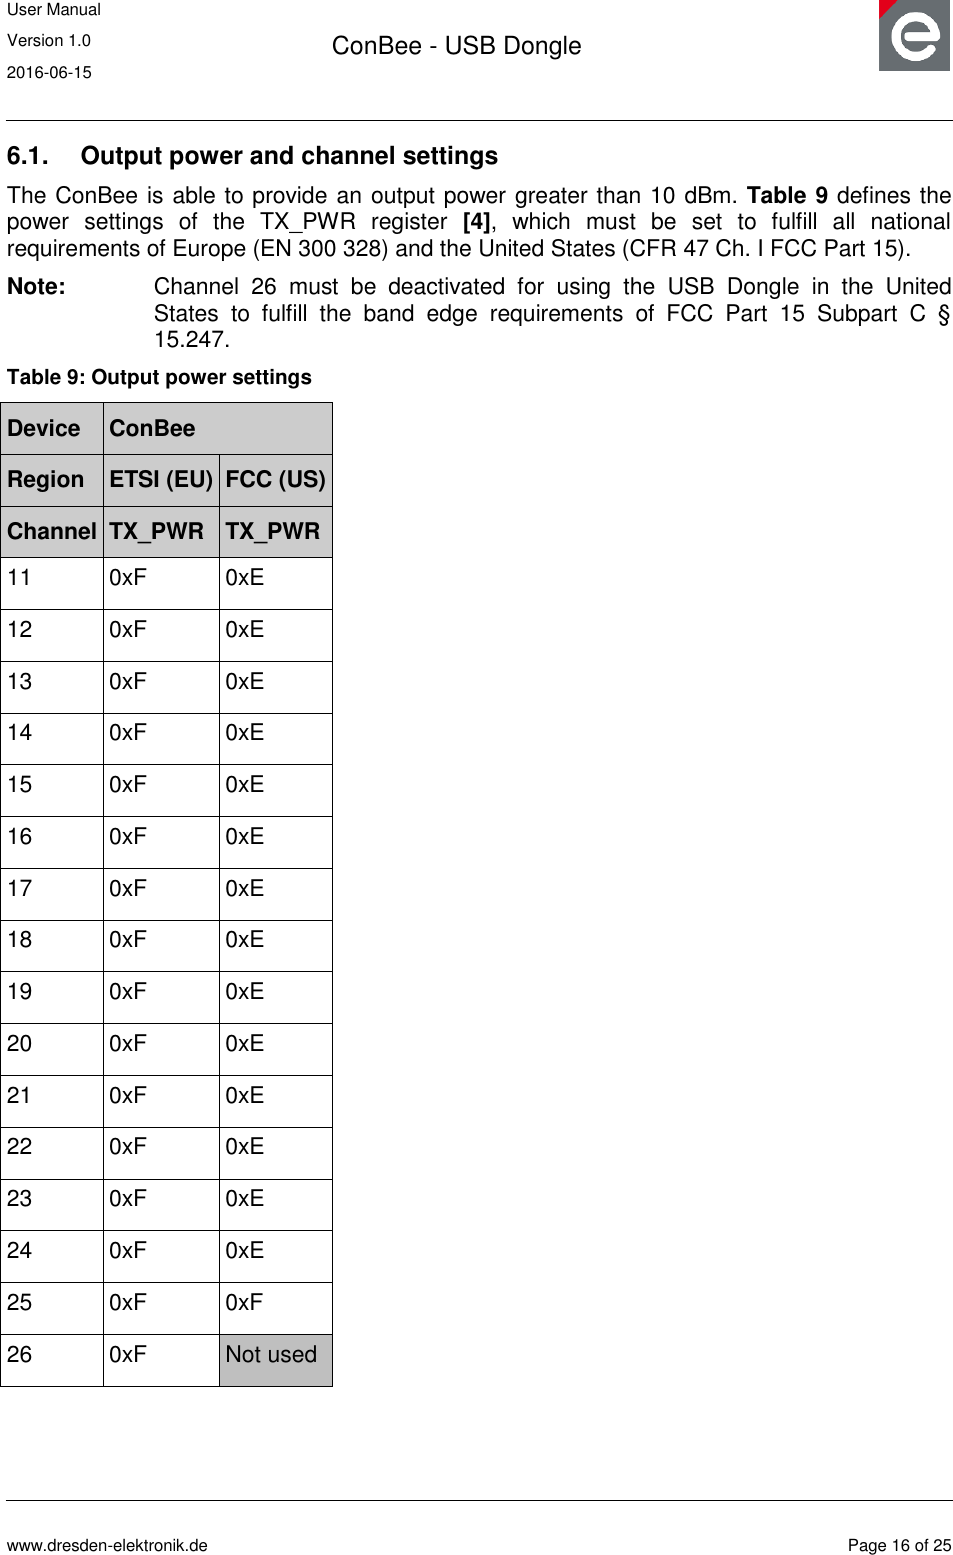 User Manual Version 1.0 2016-06-15  ConBee - USB Dongle      www.dresden-elektronik.de  Page 16 of 25  6.1.  Output power and channel settings The ConBee is able to provide an output power greater than 10 dBm. Table 9 defines the power  settings  of  the  TX_PWR  register  [4],  which  must  be  set  to  fulfill  all  national requirements of Europe (EN 300 328) and the United States (CFR 47 Ch. I FCC Part 15). Note:  Channel  26  must  be  deactivated  for  using  the  USB  Dongle  in  the  United States  to  fulfill  the  band  edge  requirements  of  FCC  Part  15  Subpart  C  § 15.247. Table 9: Output power settings Device ConBee Region ETSI (EU) FCC (US) Channel TX_PWR TX_PWR 11 0xF 0xE 12 0xF 0xE 13 0xF 0xE 14 0xF 0xE 15 0xF 0xE 16 0xF 0xE 17 0xF 0xE 18 0xF 0xE 19 0xF 0xE 20 0xF 0xE 21 0xF 0xE 22 0xF 0xE 23 0xF 0xE 24 0xF 0xE 25 0xF 0xF 26 0xF Not used  